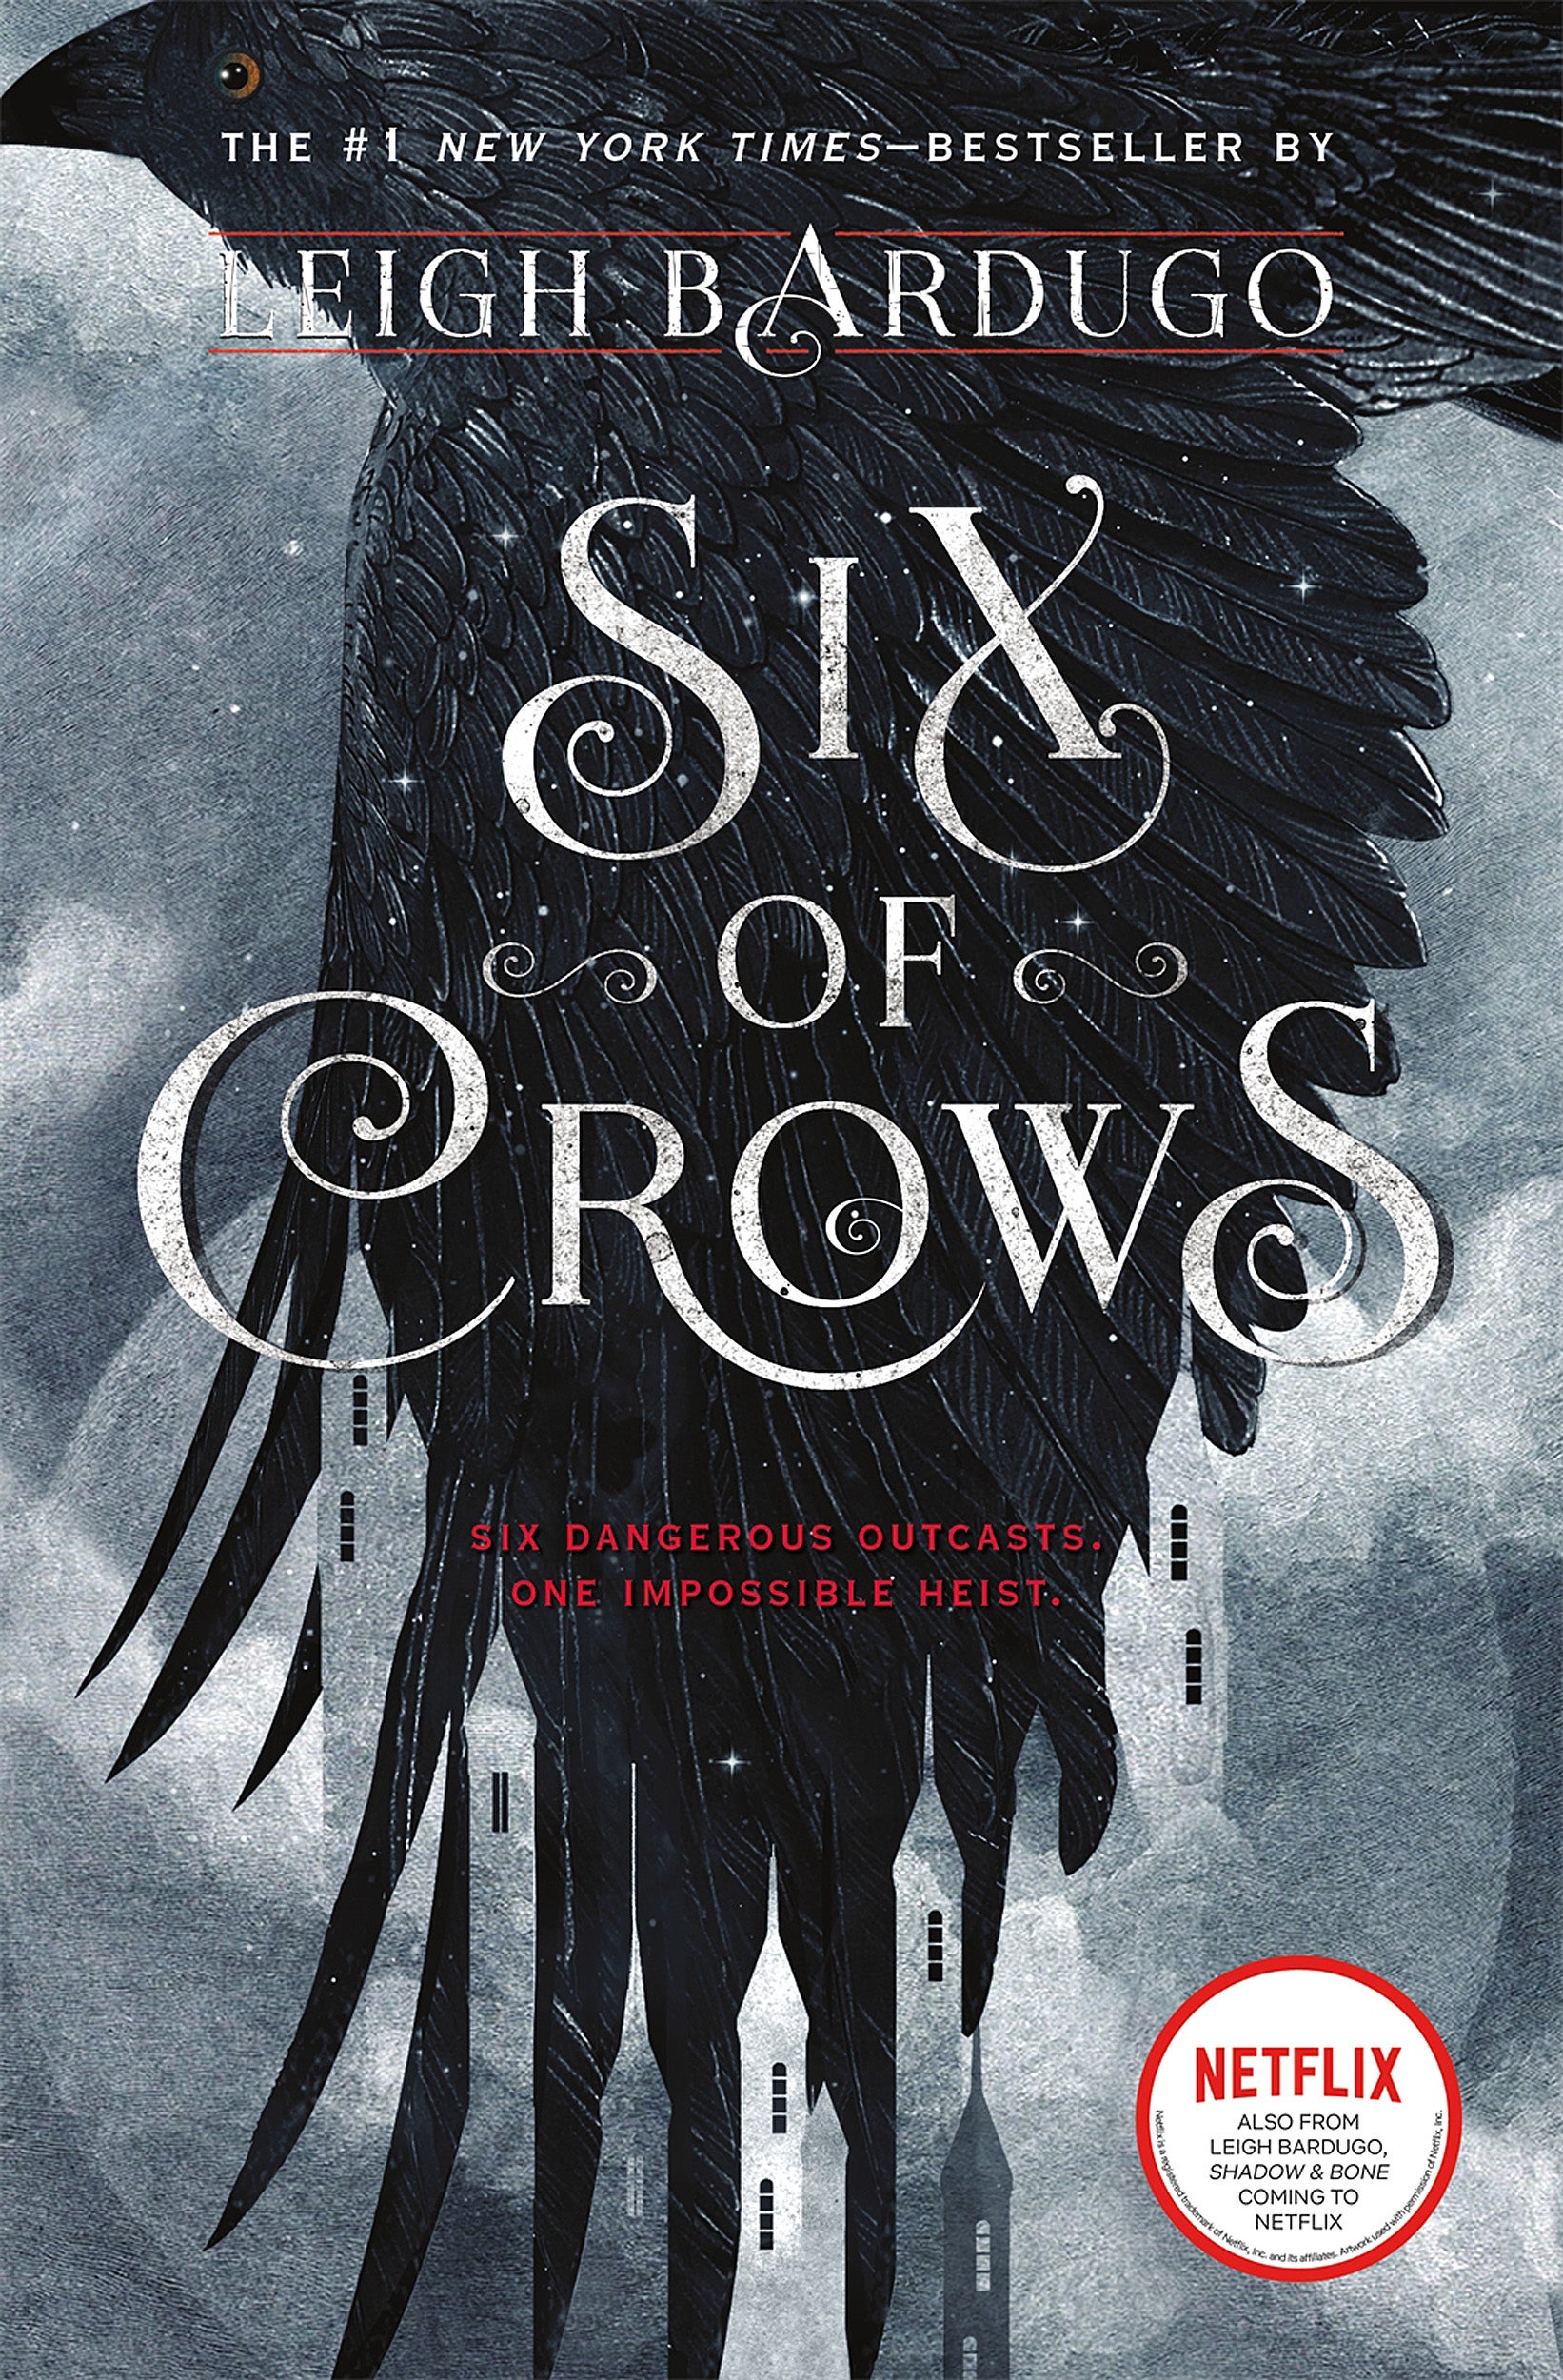 Cover of “Six of Crows” by Leigh Bardugo.